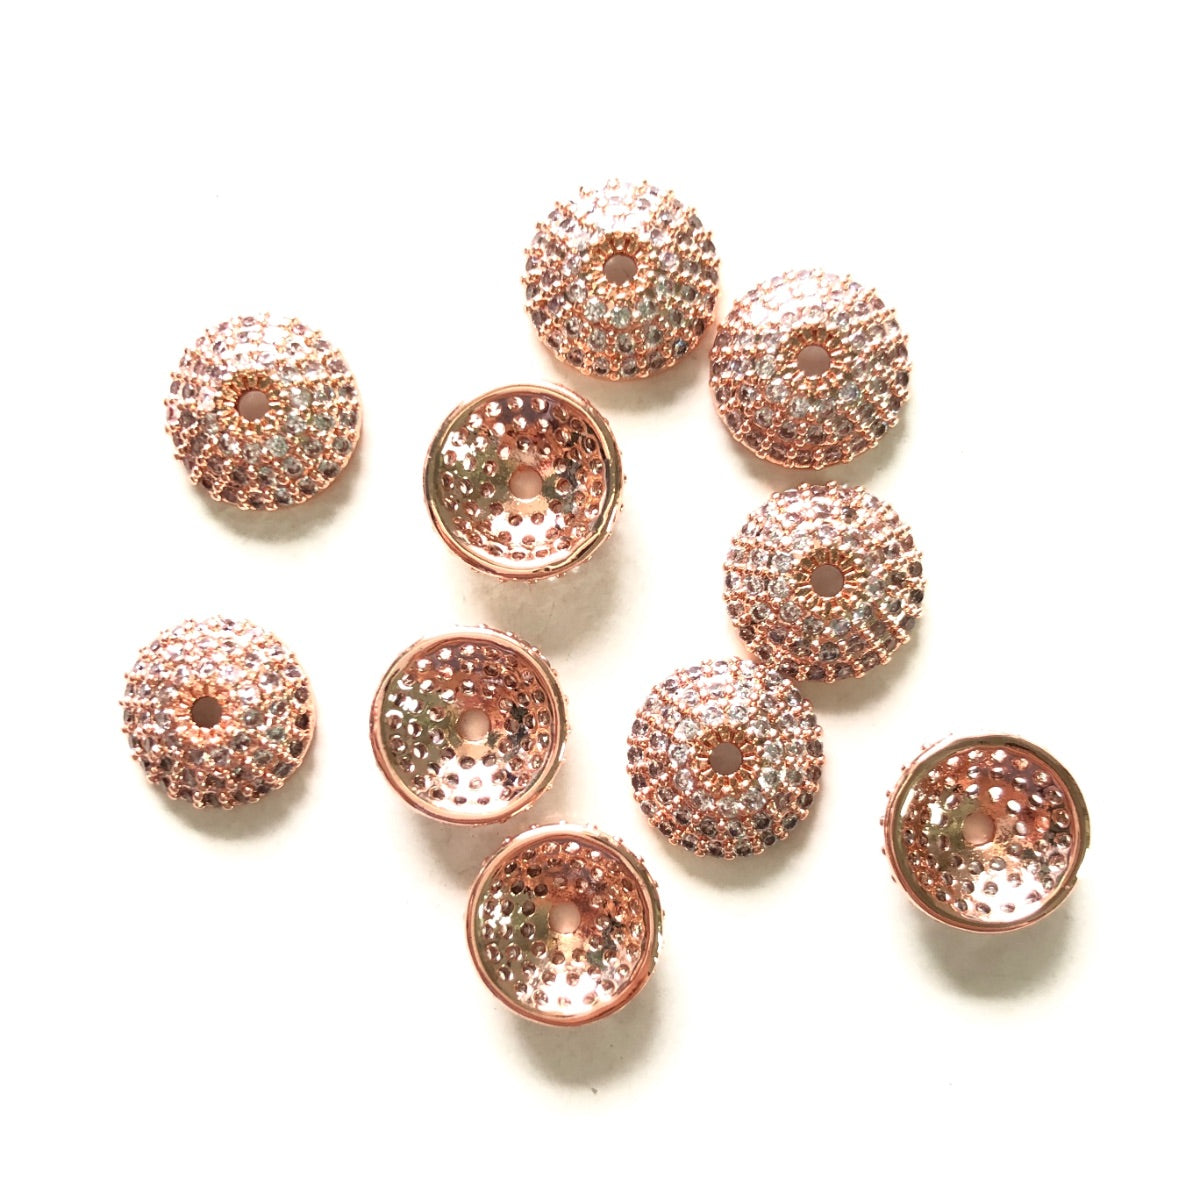 20pcs/lot 8/10/11mm Half Round CZ Paved Beads Caps Spacers Rose Gold CZ Paved Spacers Beads Caps New Spacers Arrivals Charms Beads Beyond